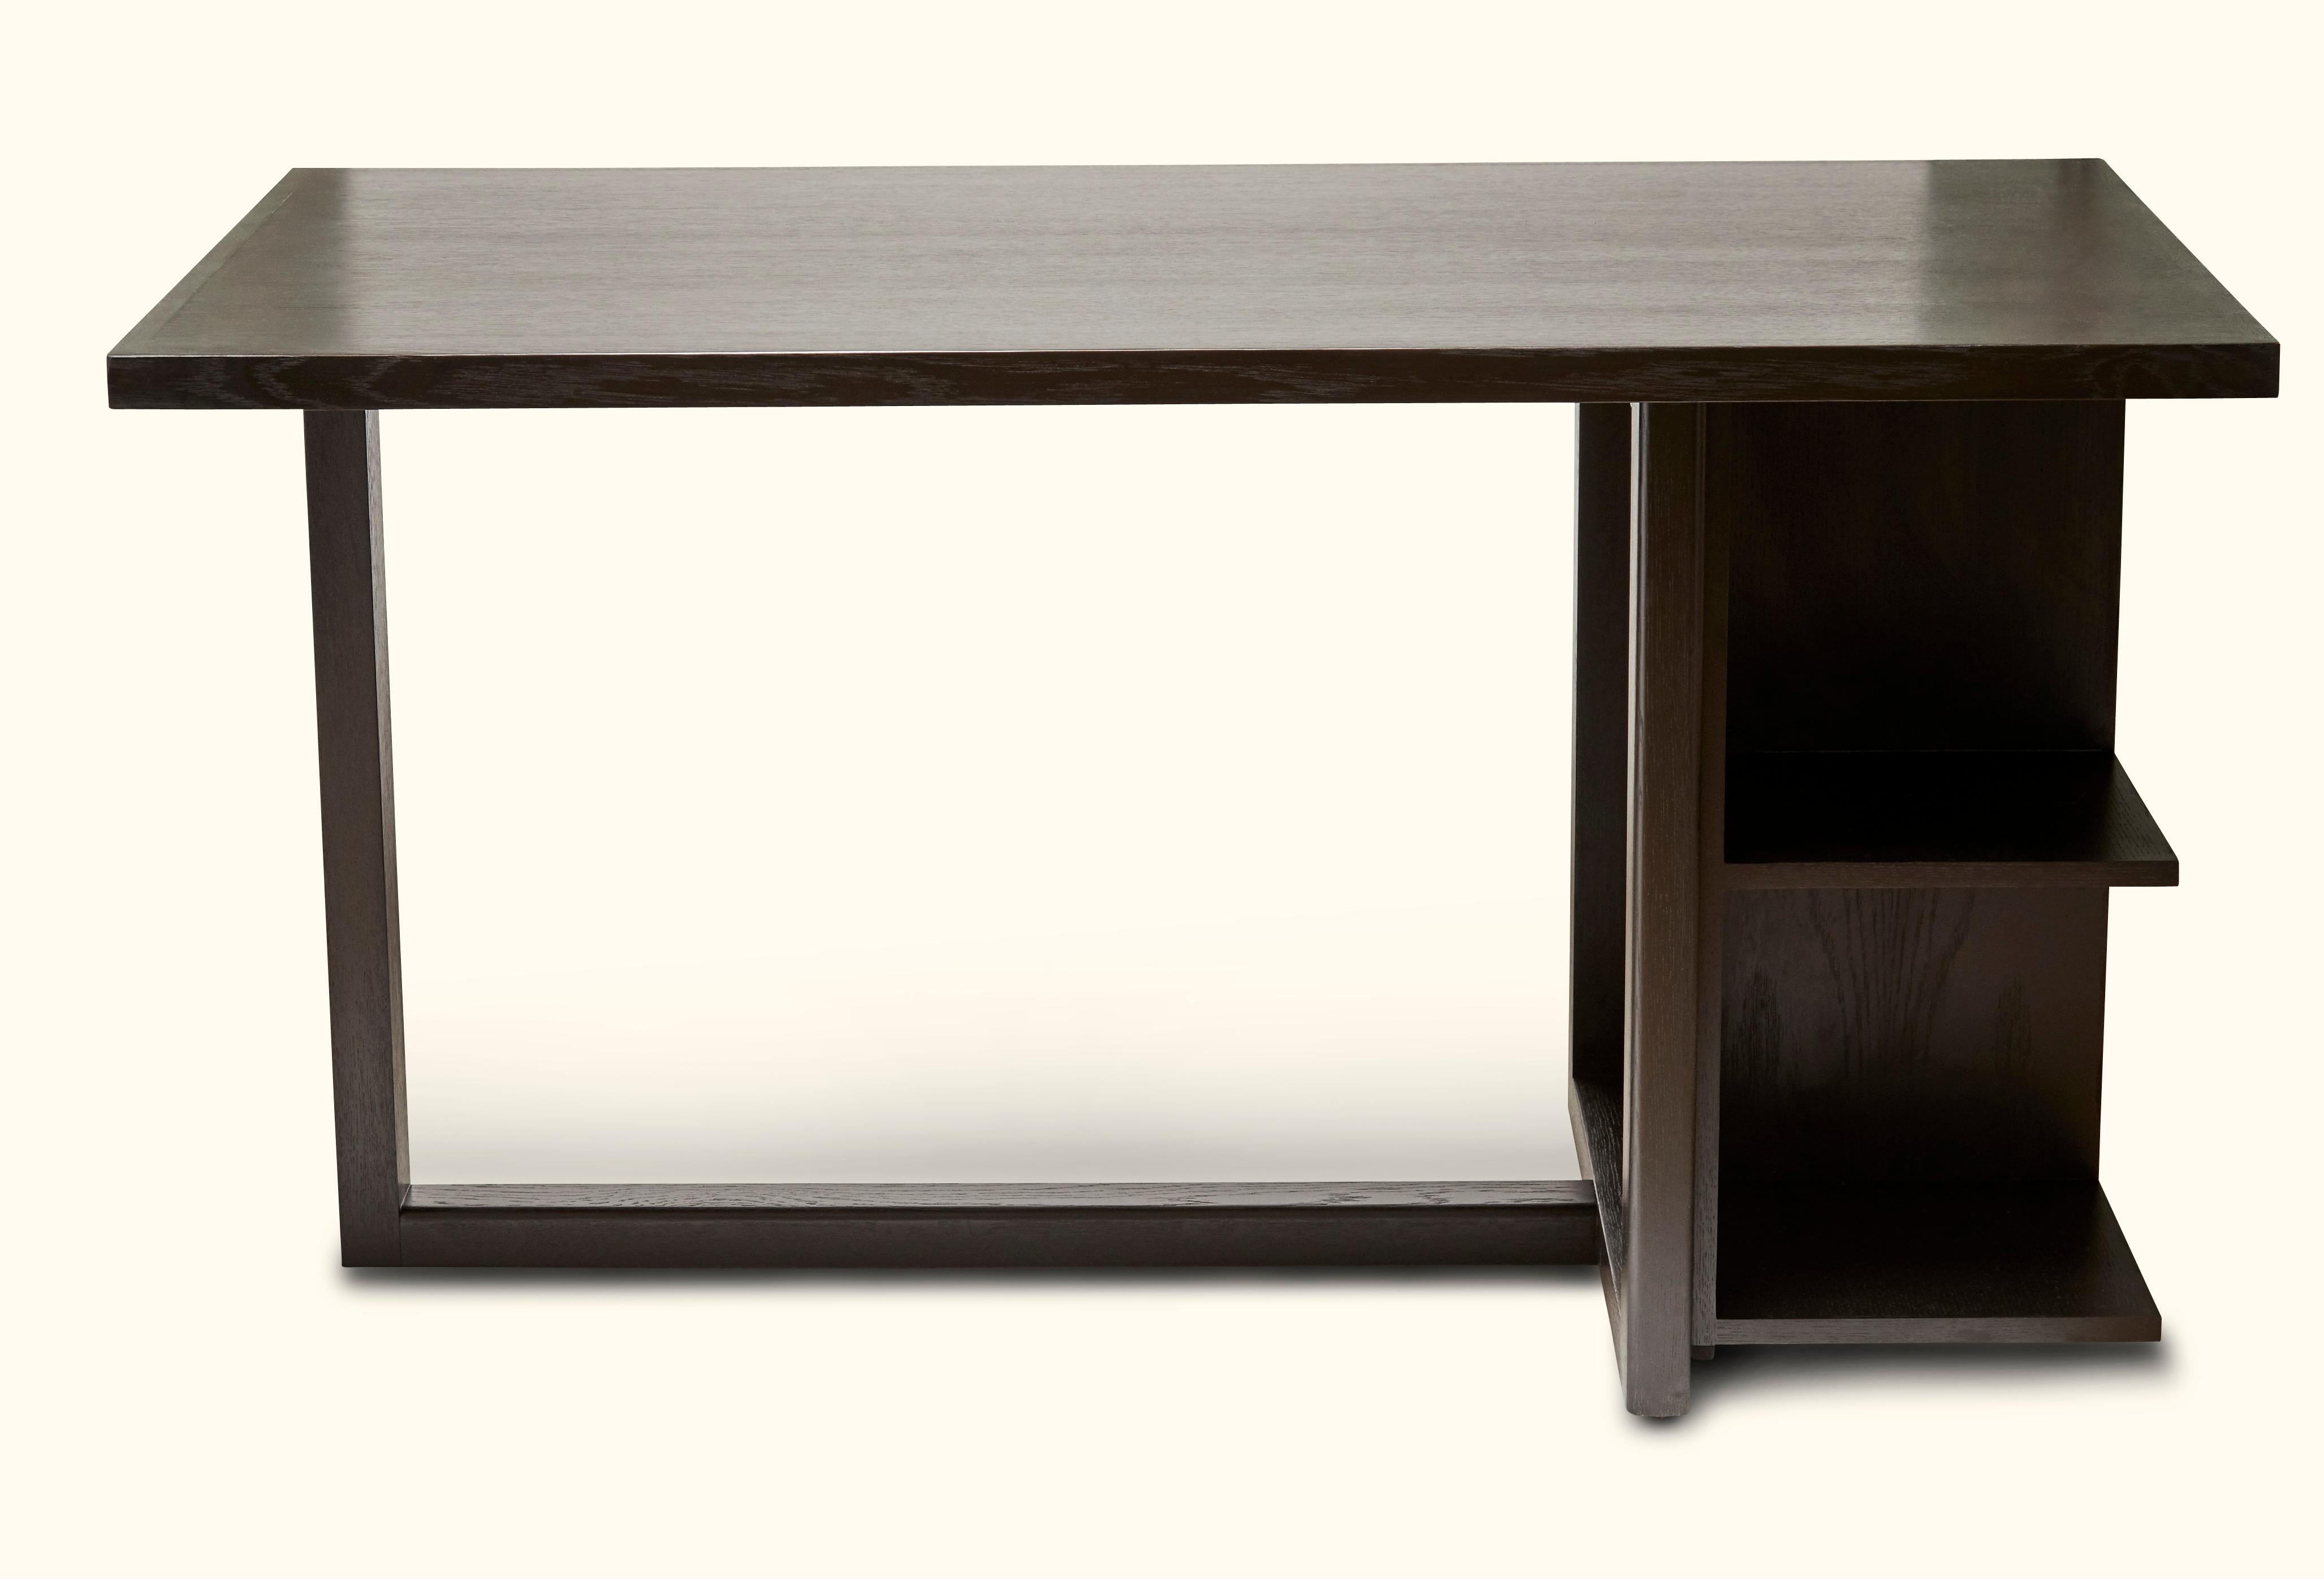 The Ivanhoe desk features a cantilevered base with open display shelves. Available in American walnut or white oak and drawers are available upon request. Shown here in dark Greywashed oak. Available finishes may vary. 

The Lawson-Fenning